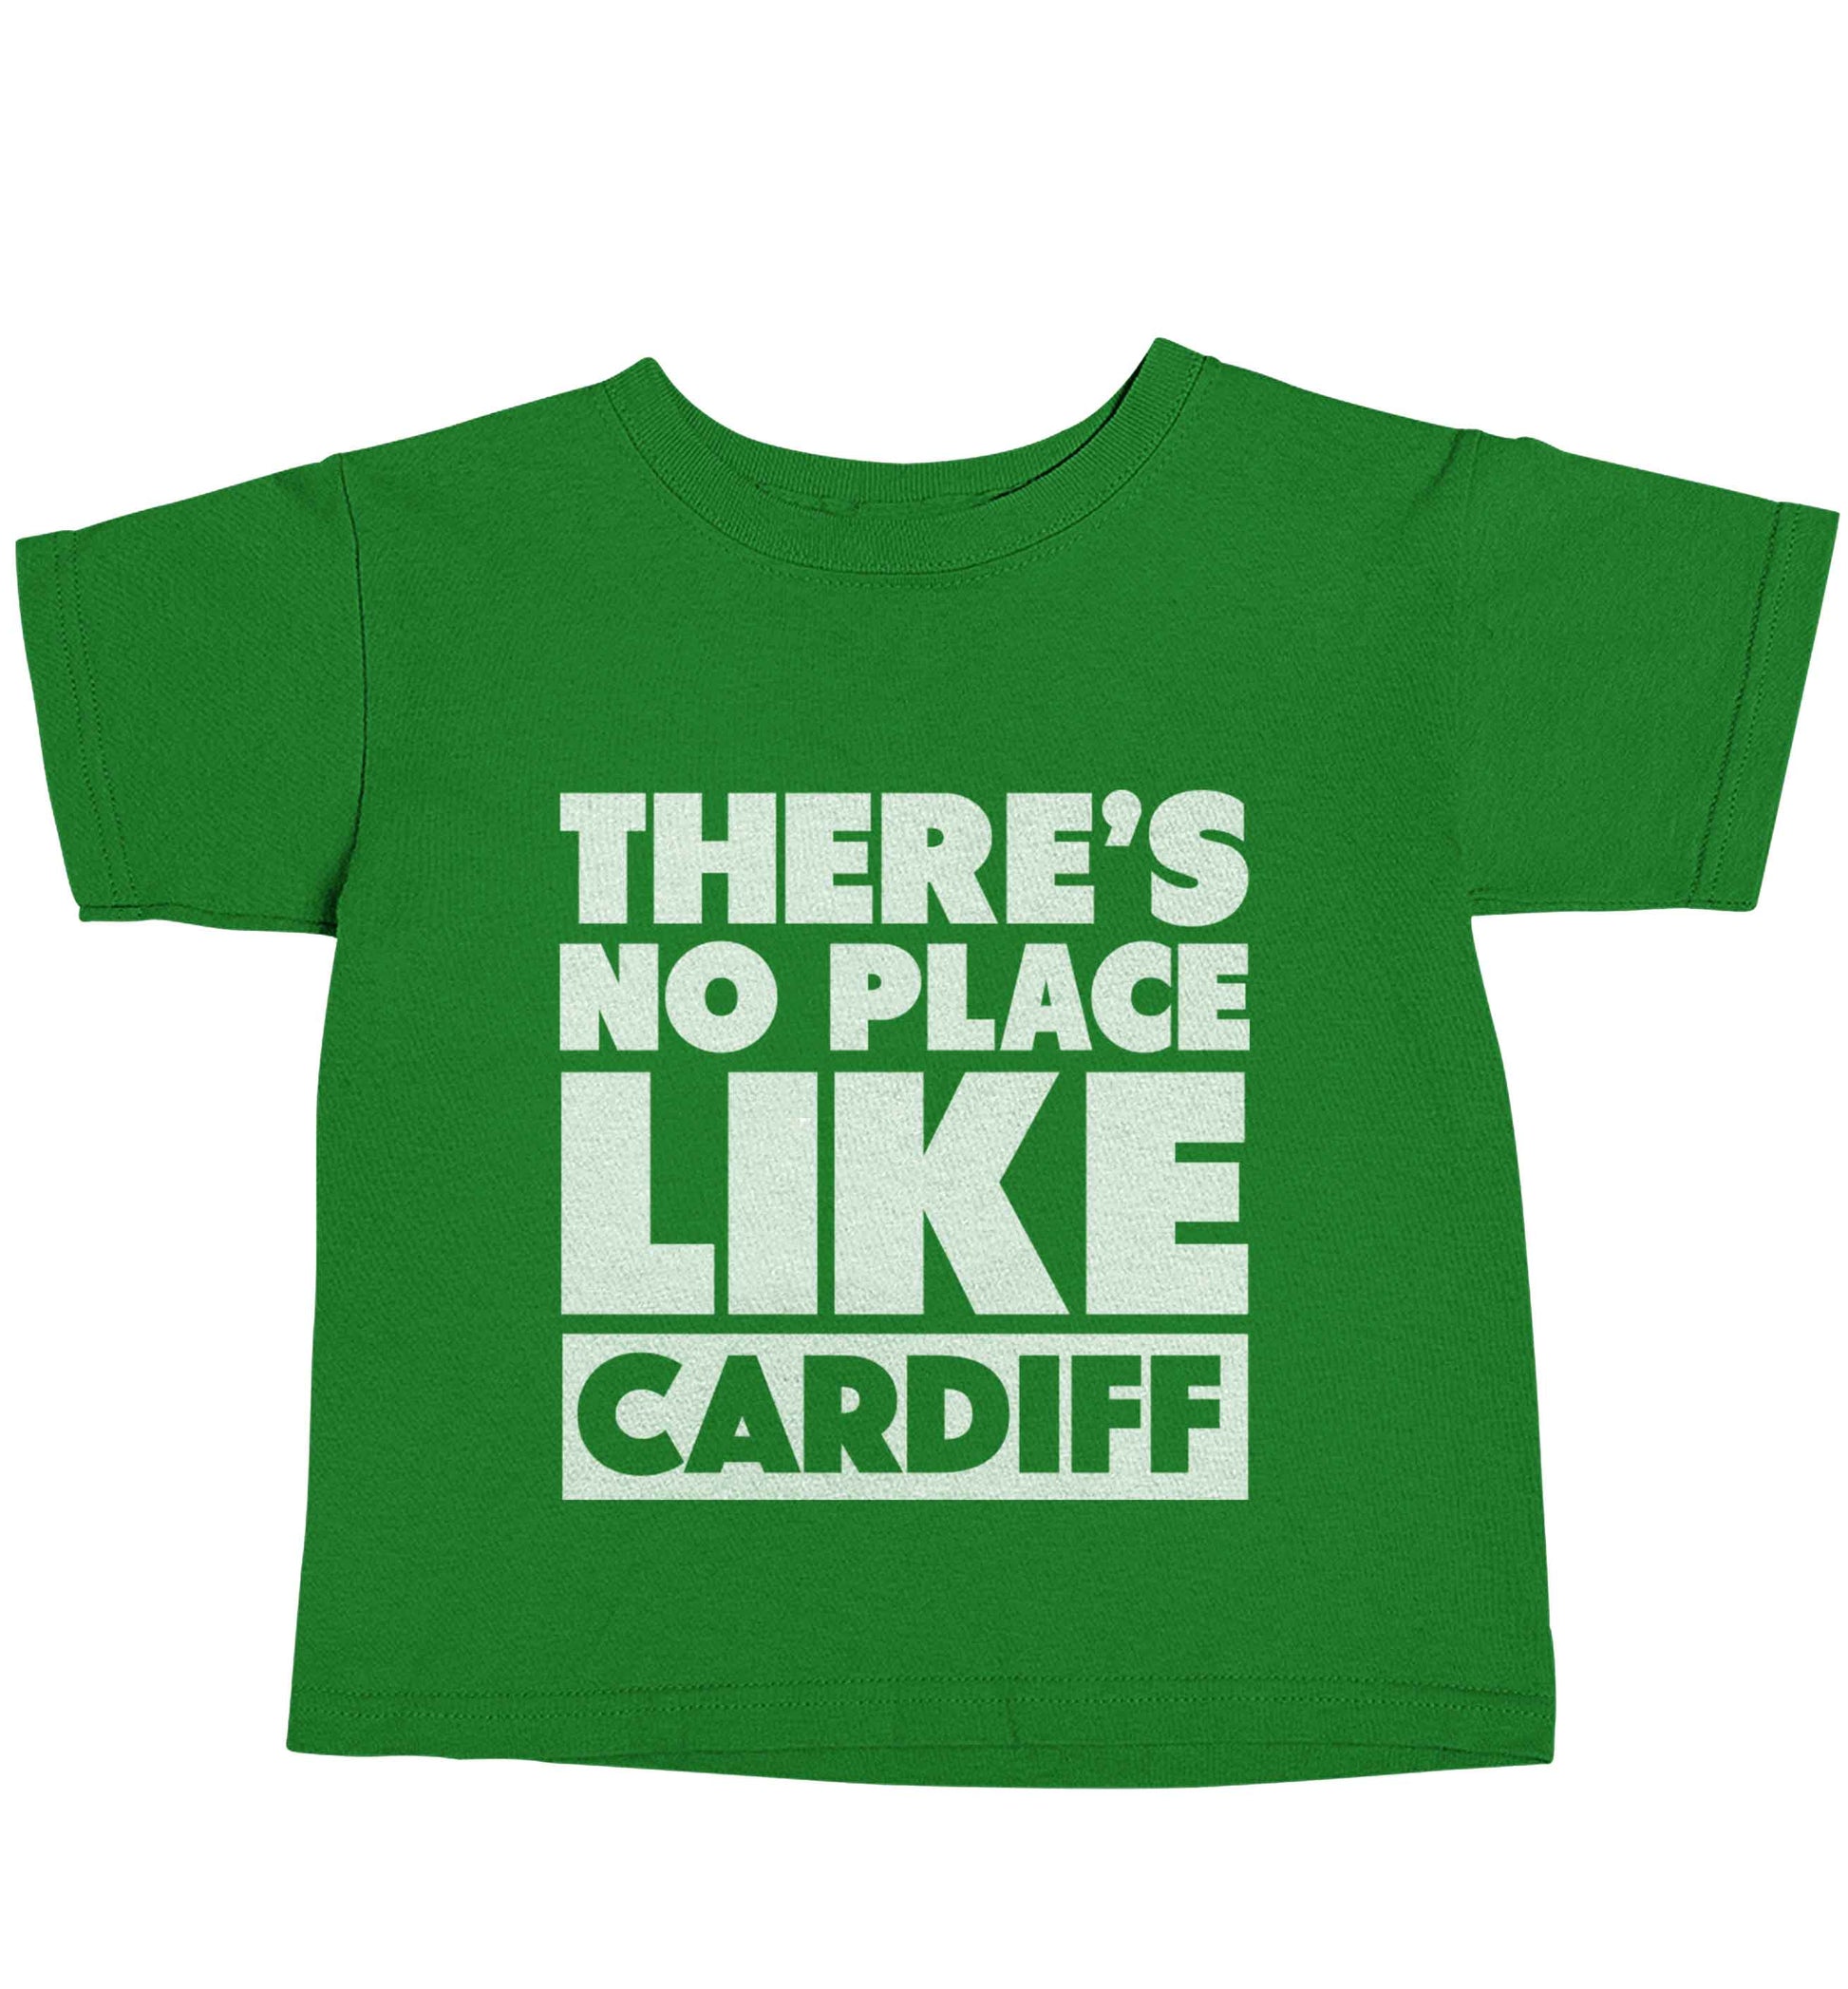 There's no place like Cardiff green baby toddler Tshirt 2 Years